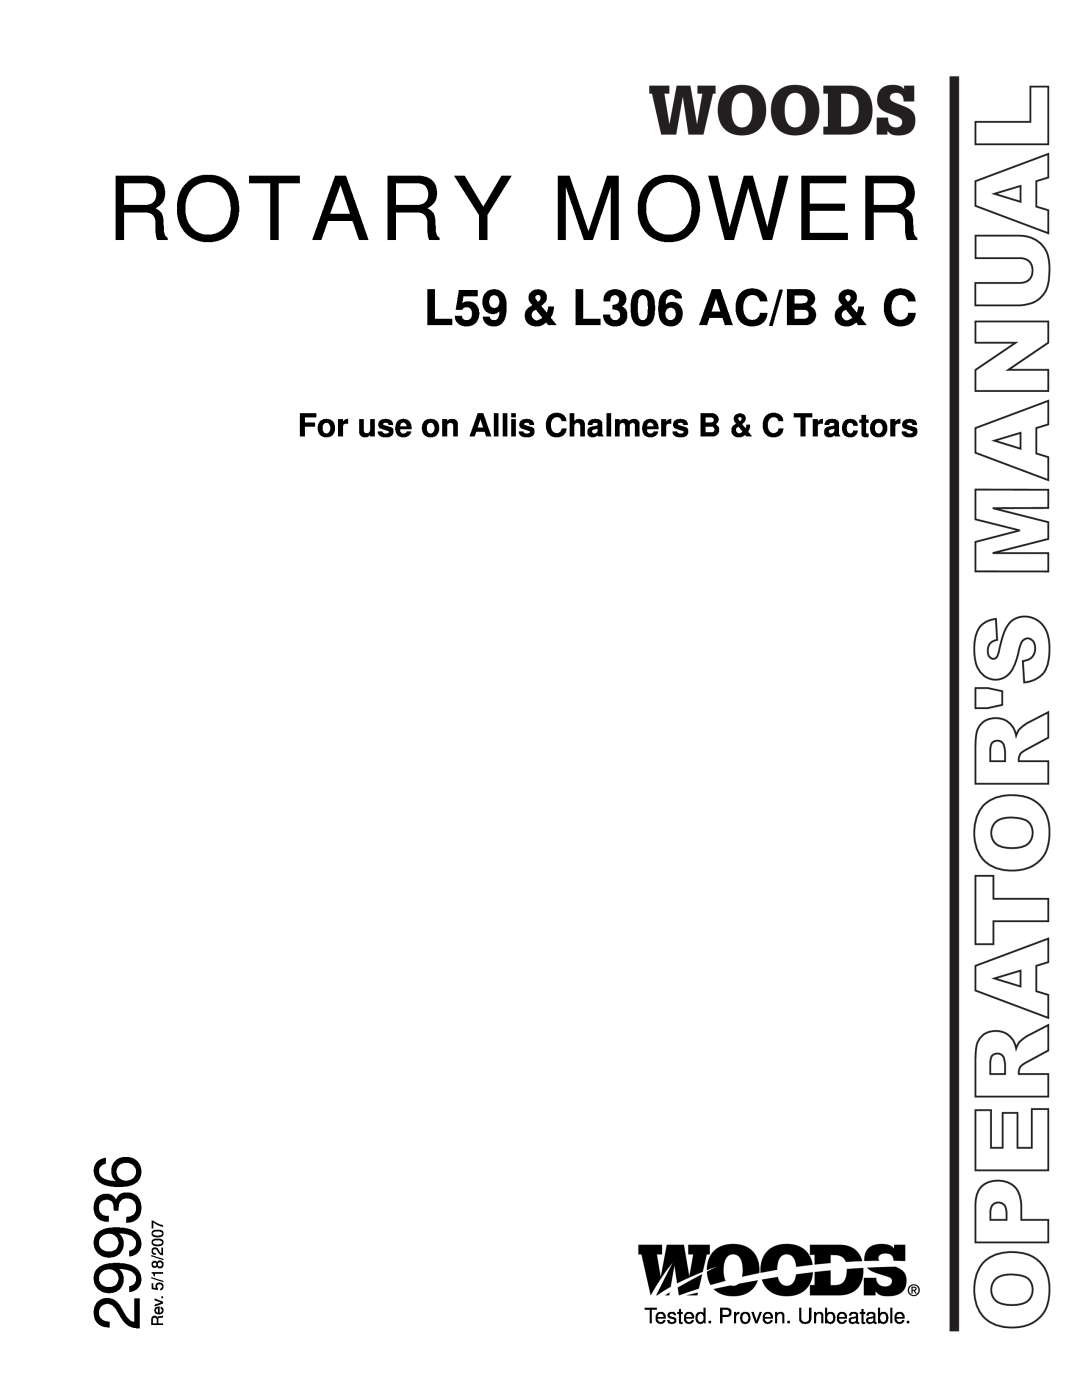 Woods Equipment L59, L36 manual For use on Allis Chalmers B & C Tractors, Tested. Proven. Unbeatable, Rotary Mower, 29936 